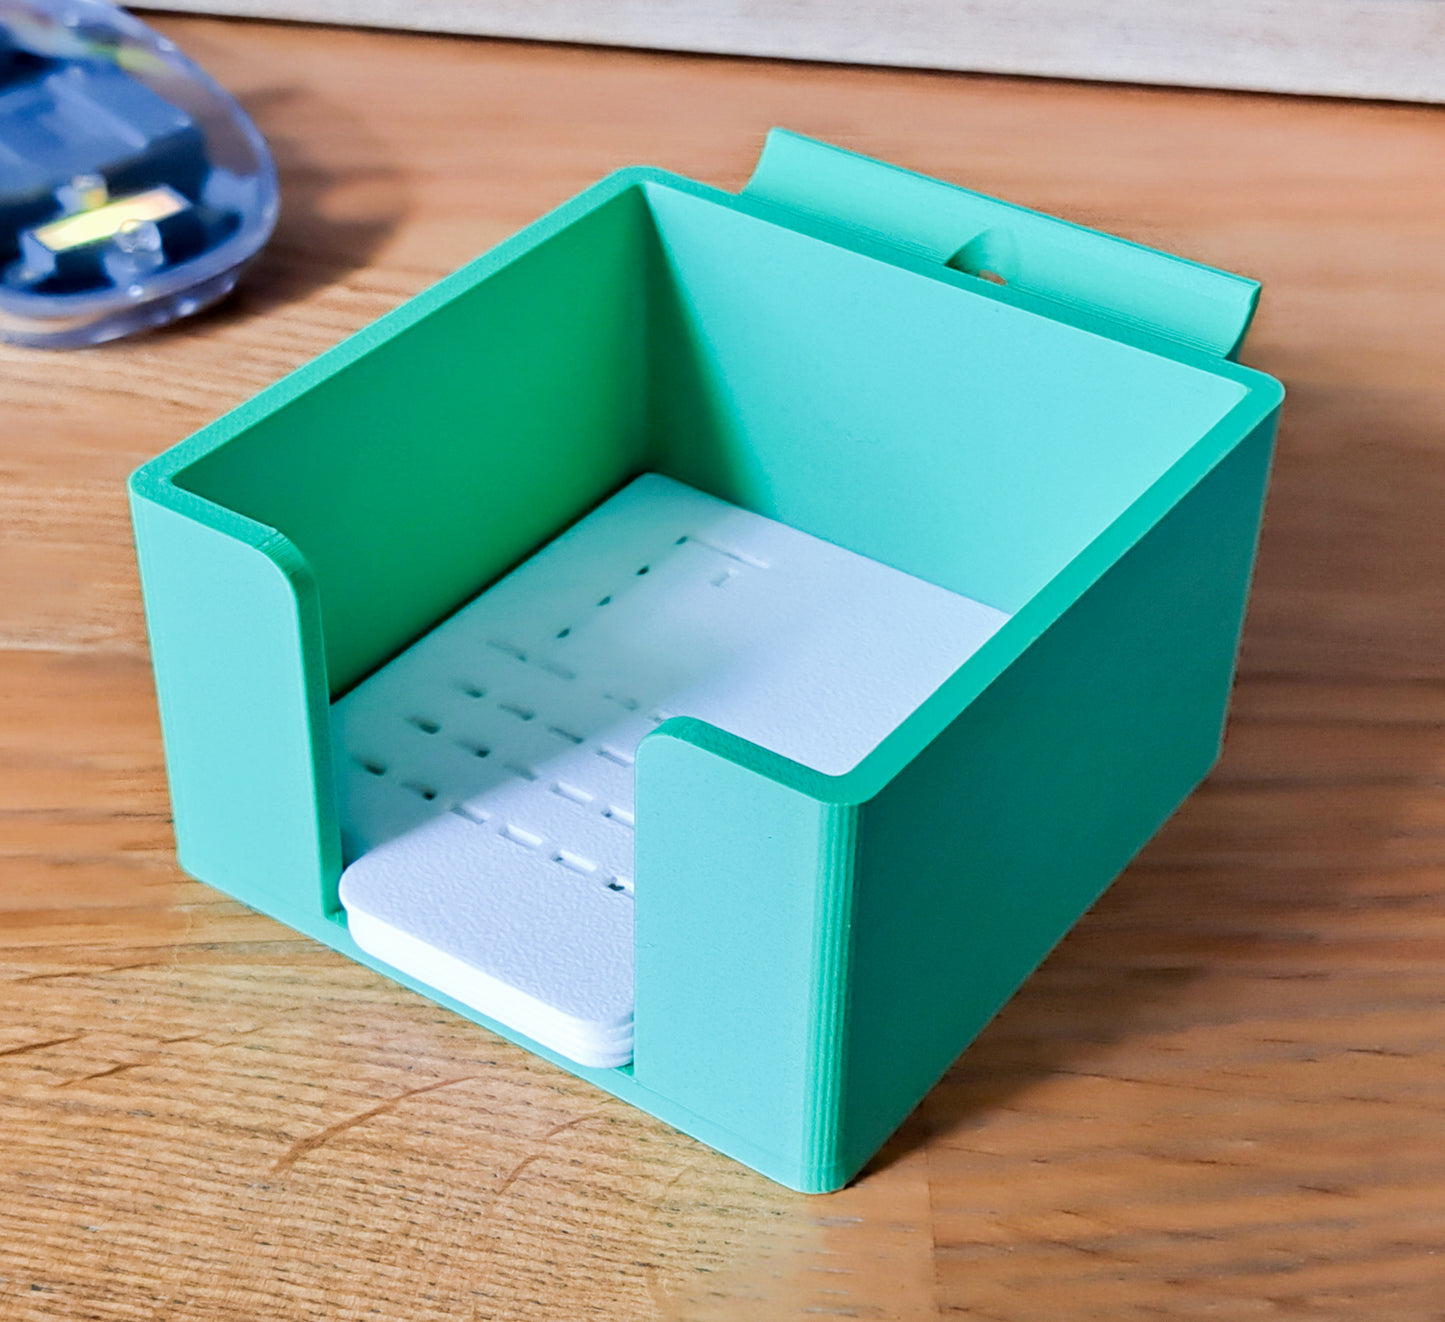 Multifunctional Post-It Note Holder with 5 Productivity & Play Stencils